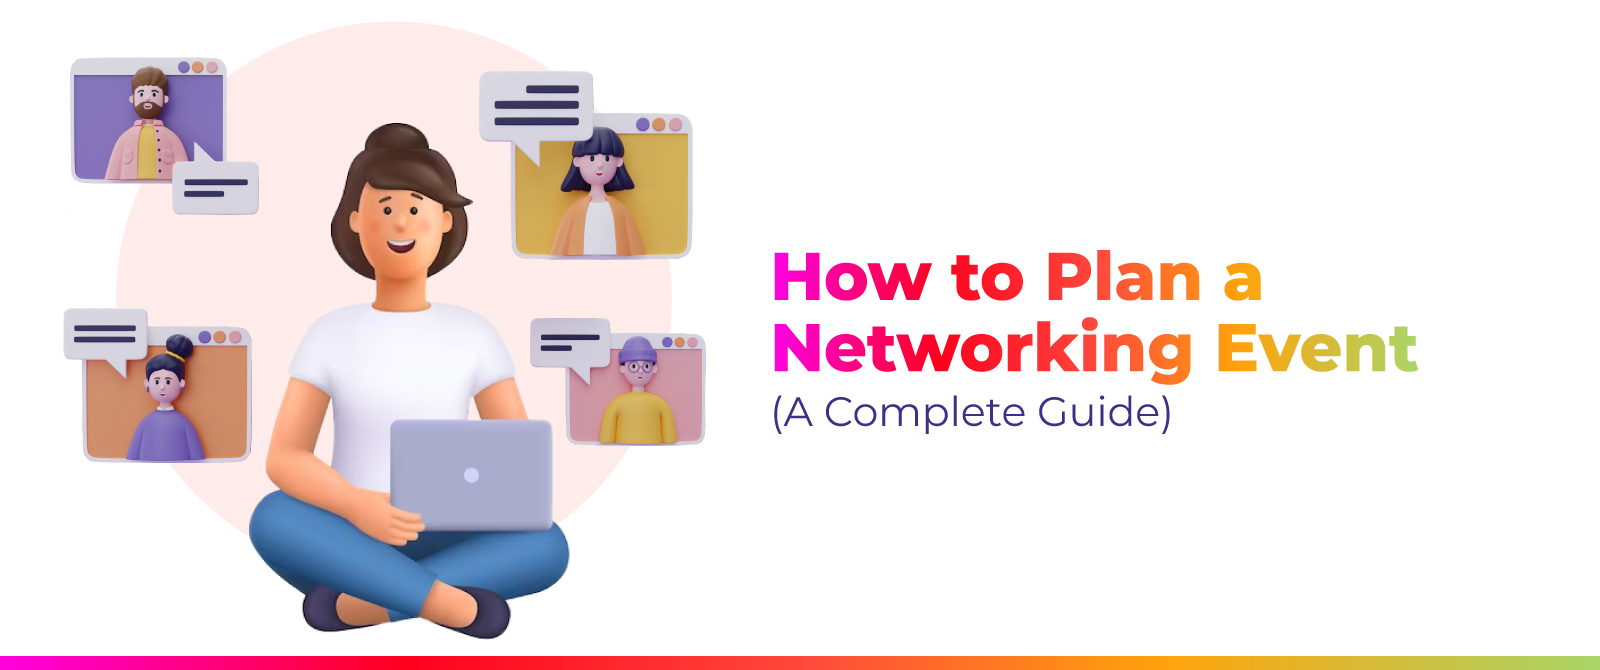 How to Plan a Networking Event (A Complete Guide)